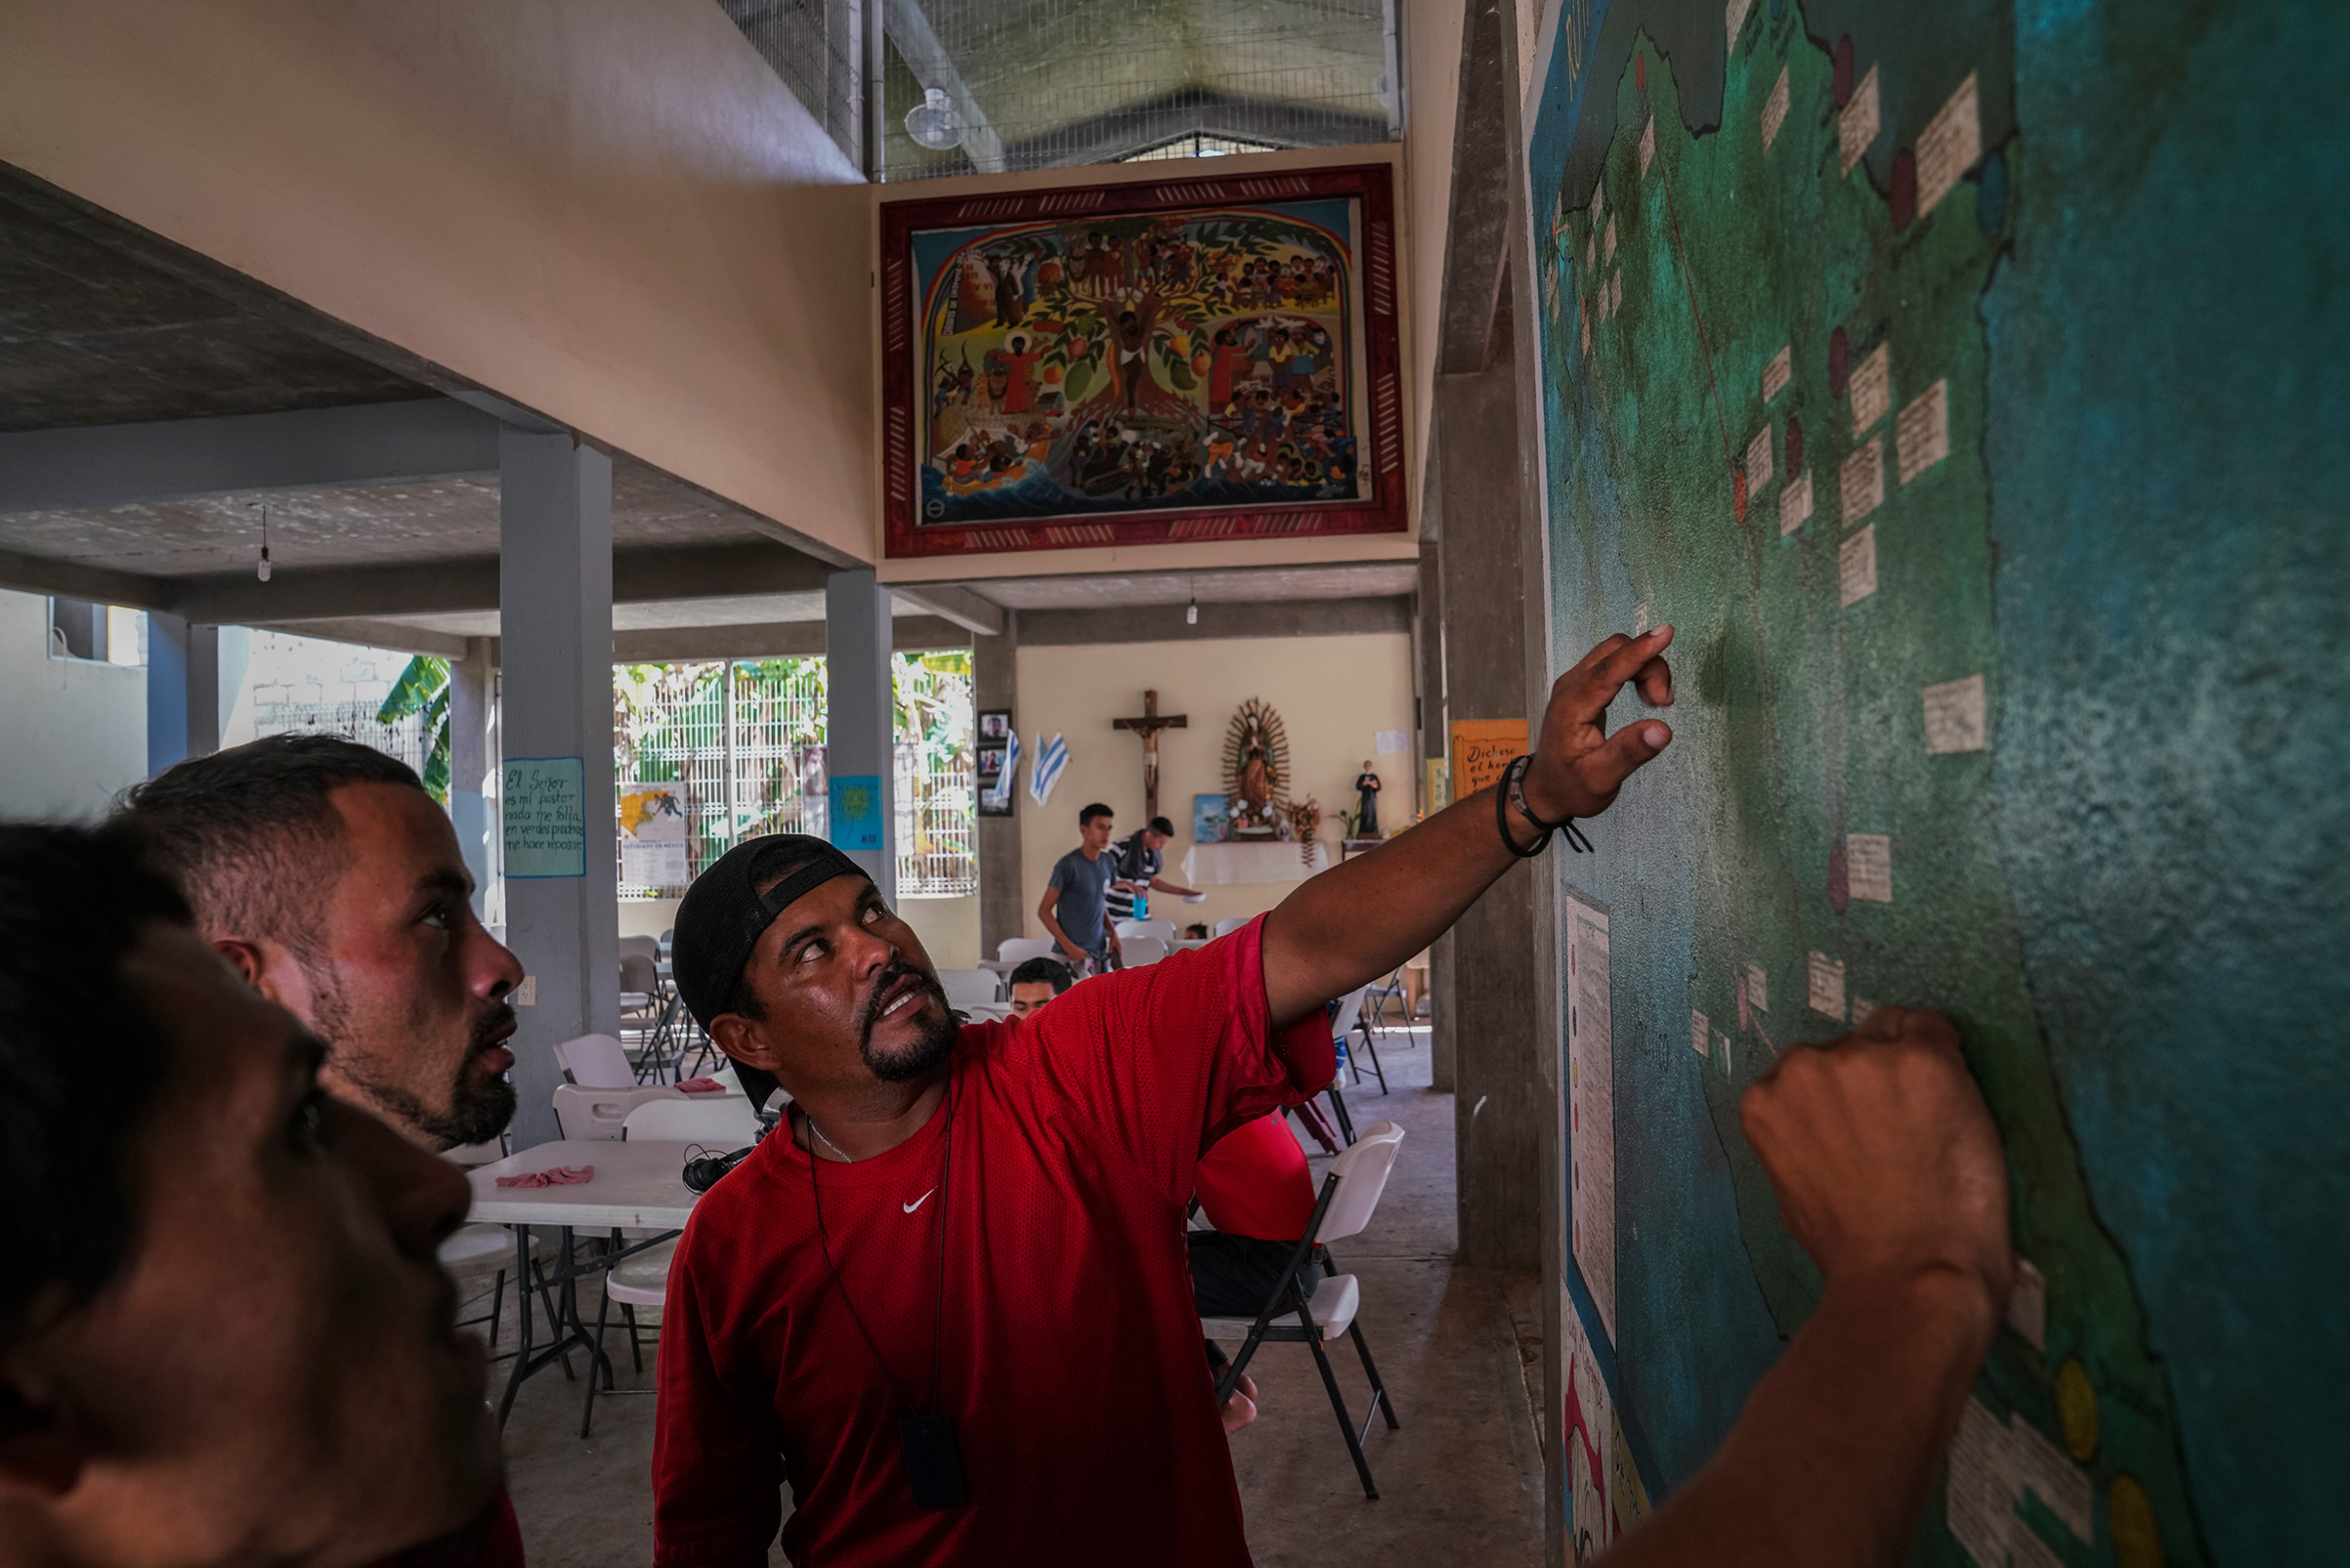 Miguel Alvarado, 36, explains the different routes that migrants can take at a shelter near Palenque, Chiapas, on Oct. 20. Miguel plans to work in the U.S. to be able to support his three kids who he left behind. He had heard about the caravan that is currently traveling through Mexico, but he decided not to join it because he is afraid they will soon be stopped. (Veronica G. Cardenas for TIME)